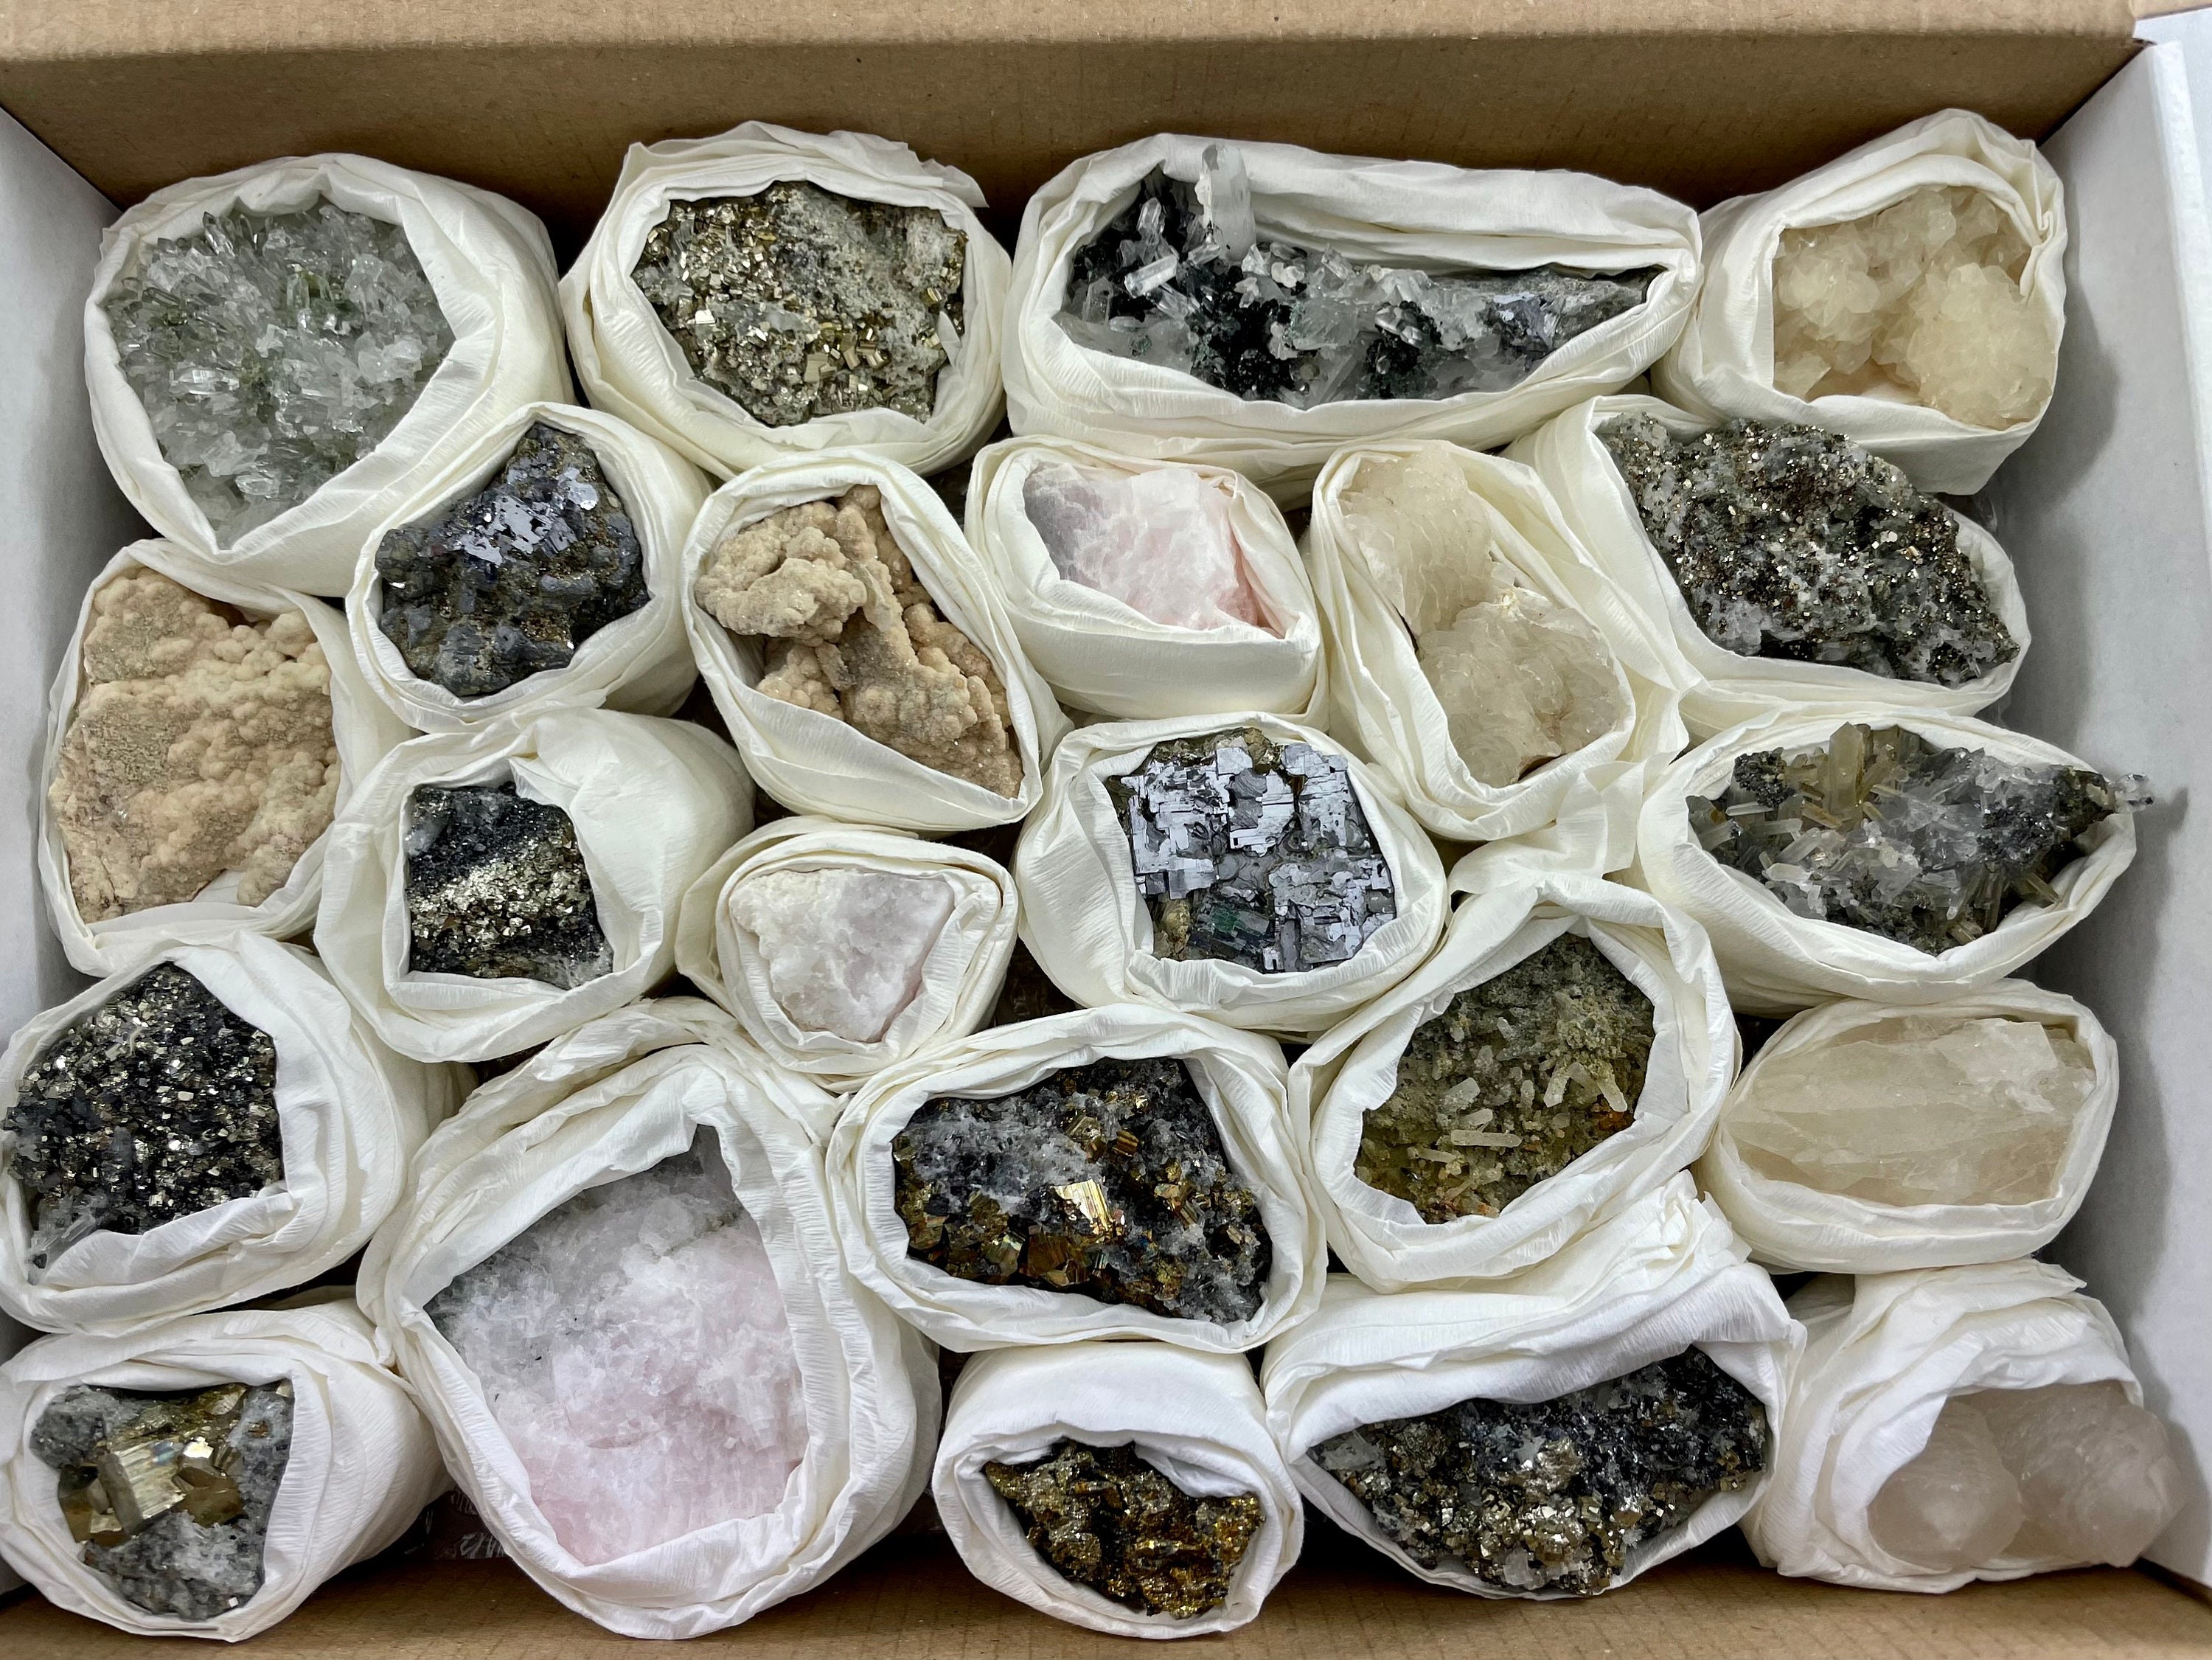 One box mix Minerals from Bulgaria,Flat minerals,Wholesale Minerals,Set Minerals,Bulgarian Minerals,Natural Crystal,Specimen,Collection,ston